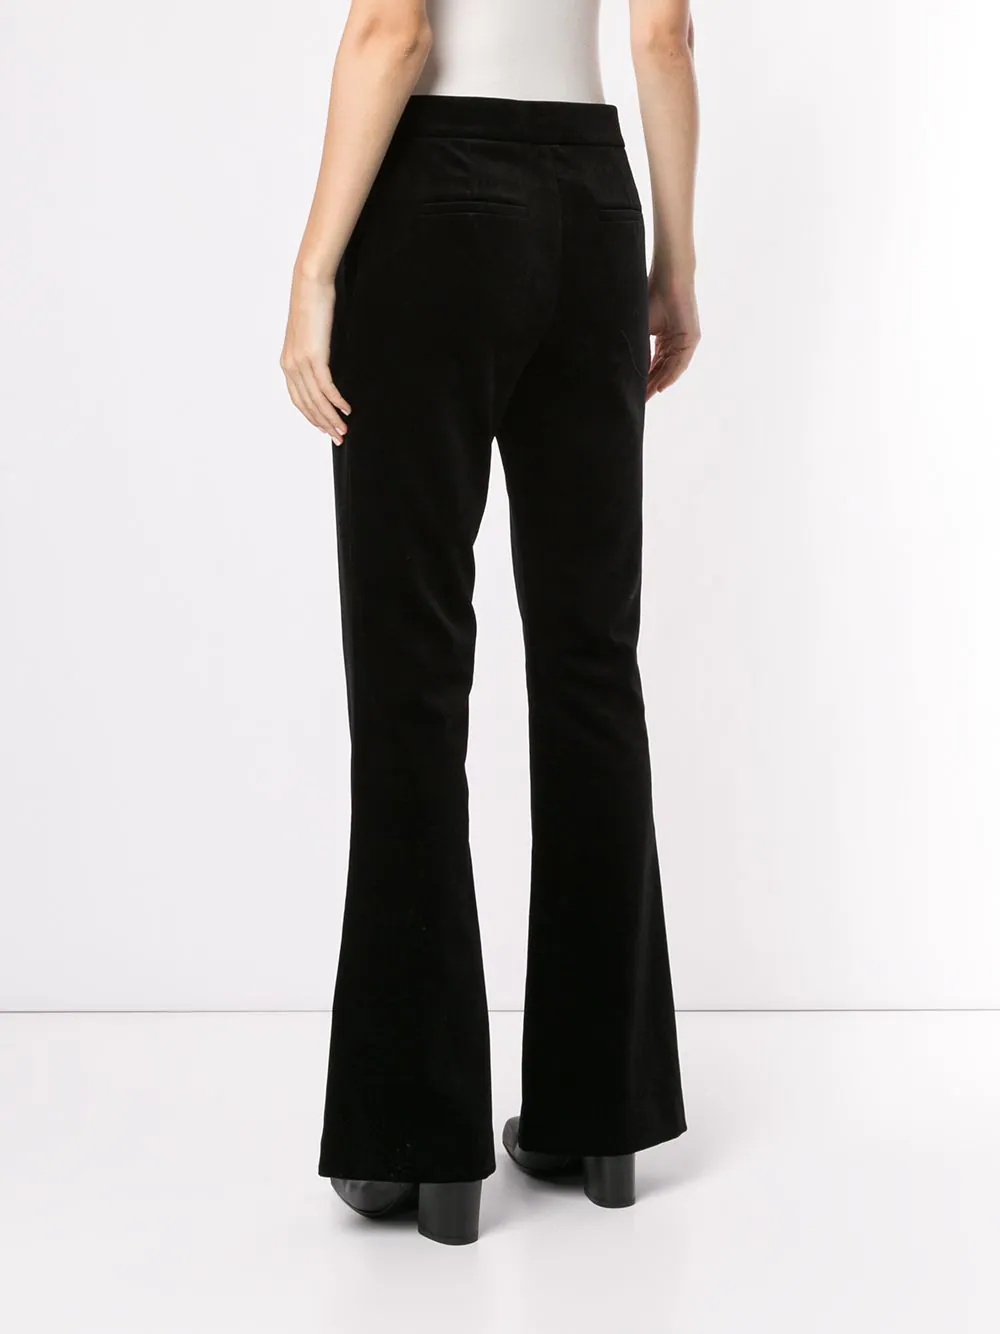 flared style trousers - 4